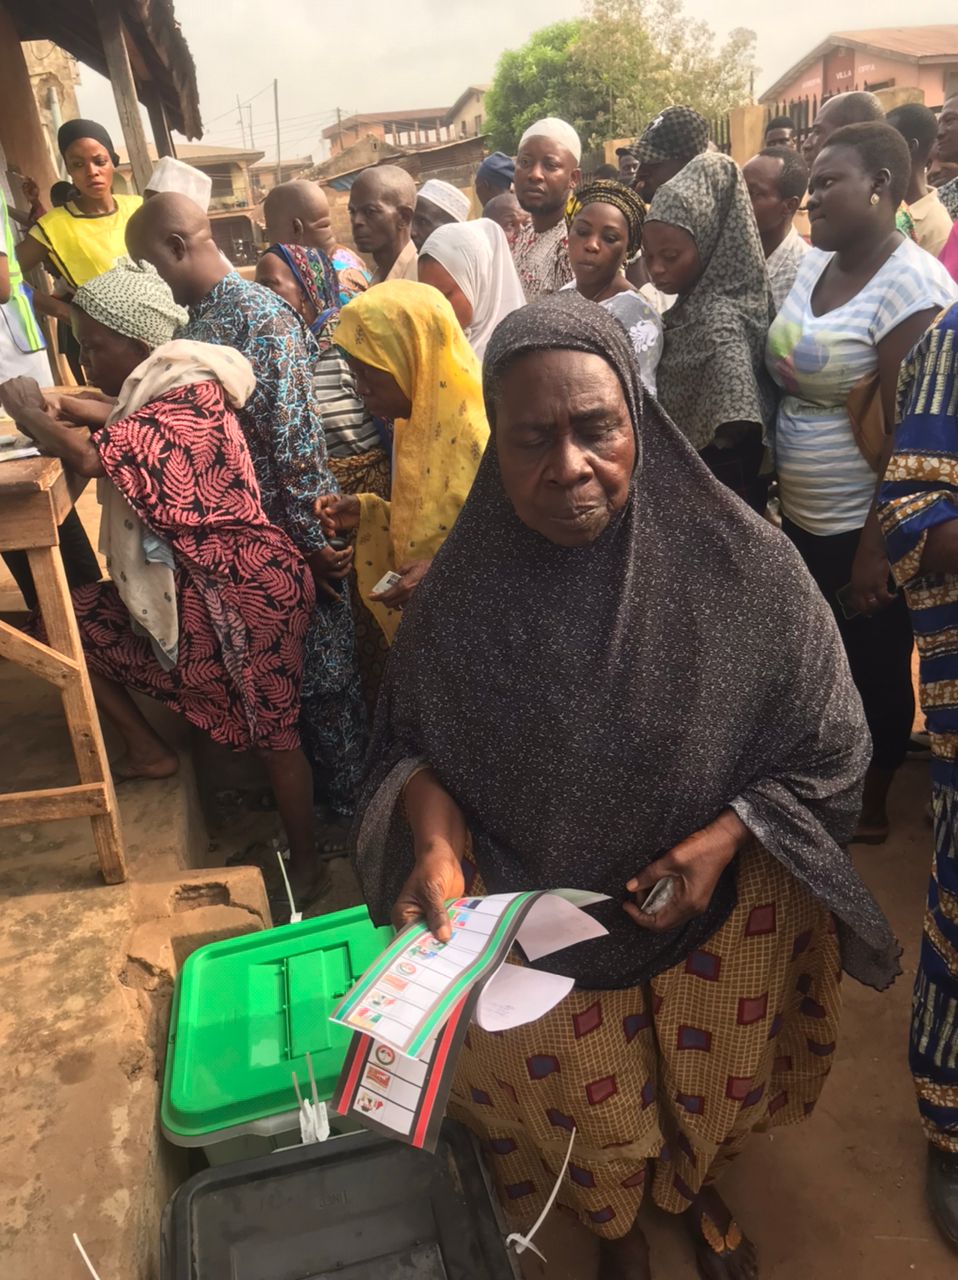 #NigeriaDecides:Vulnerable voters neglected in Nigeria's voting process